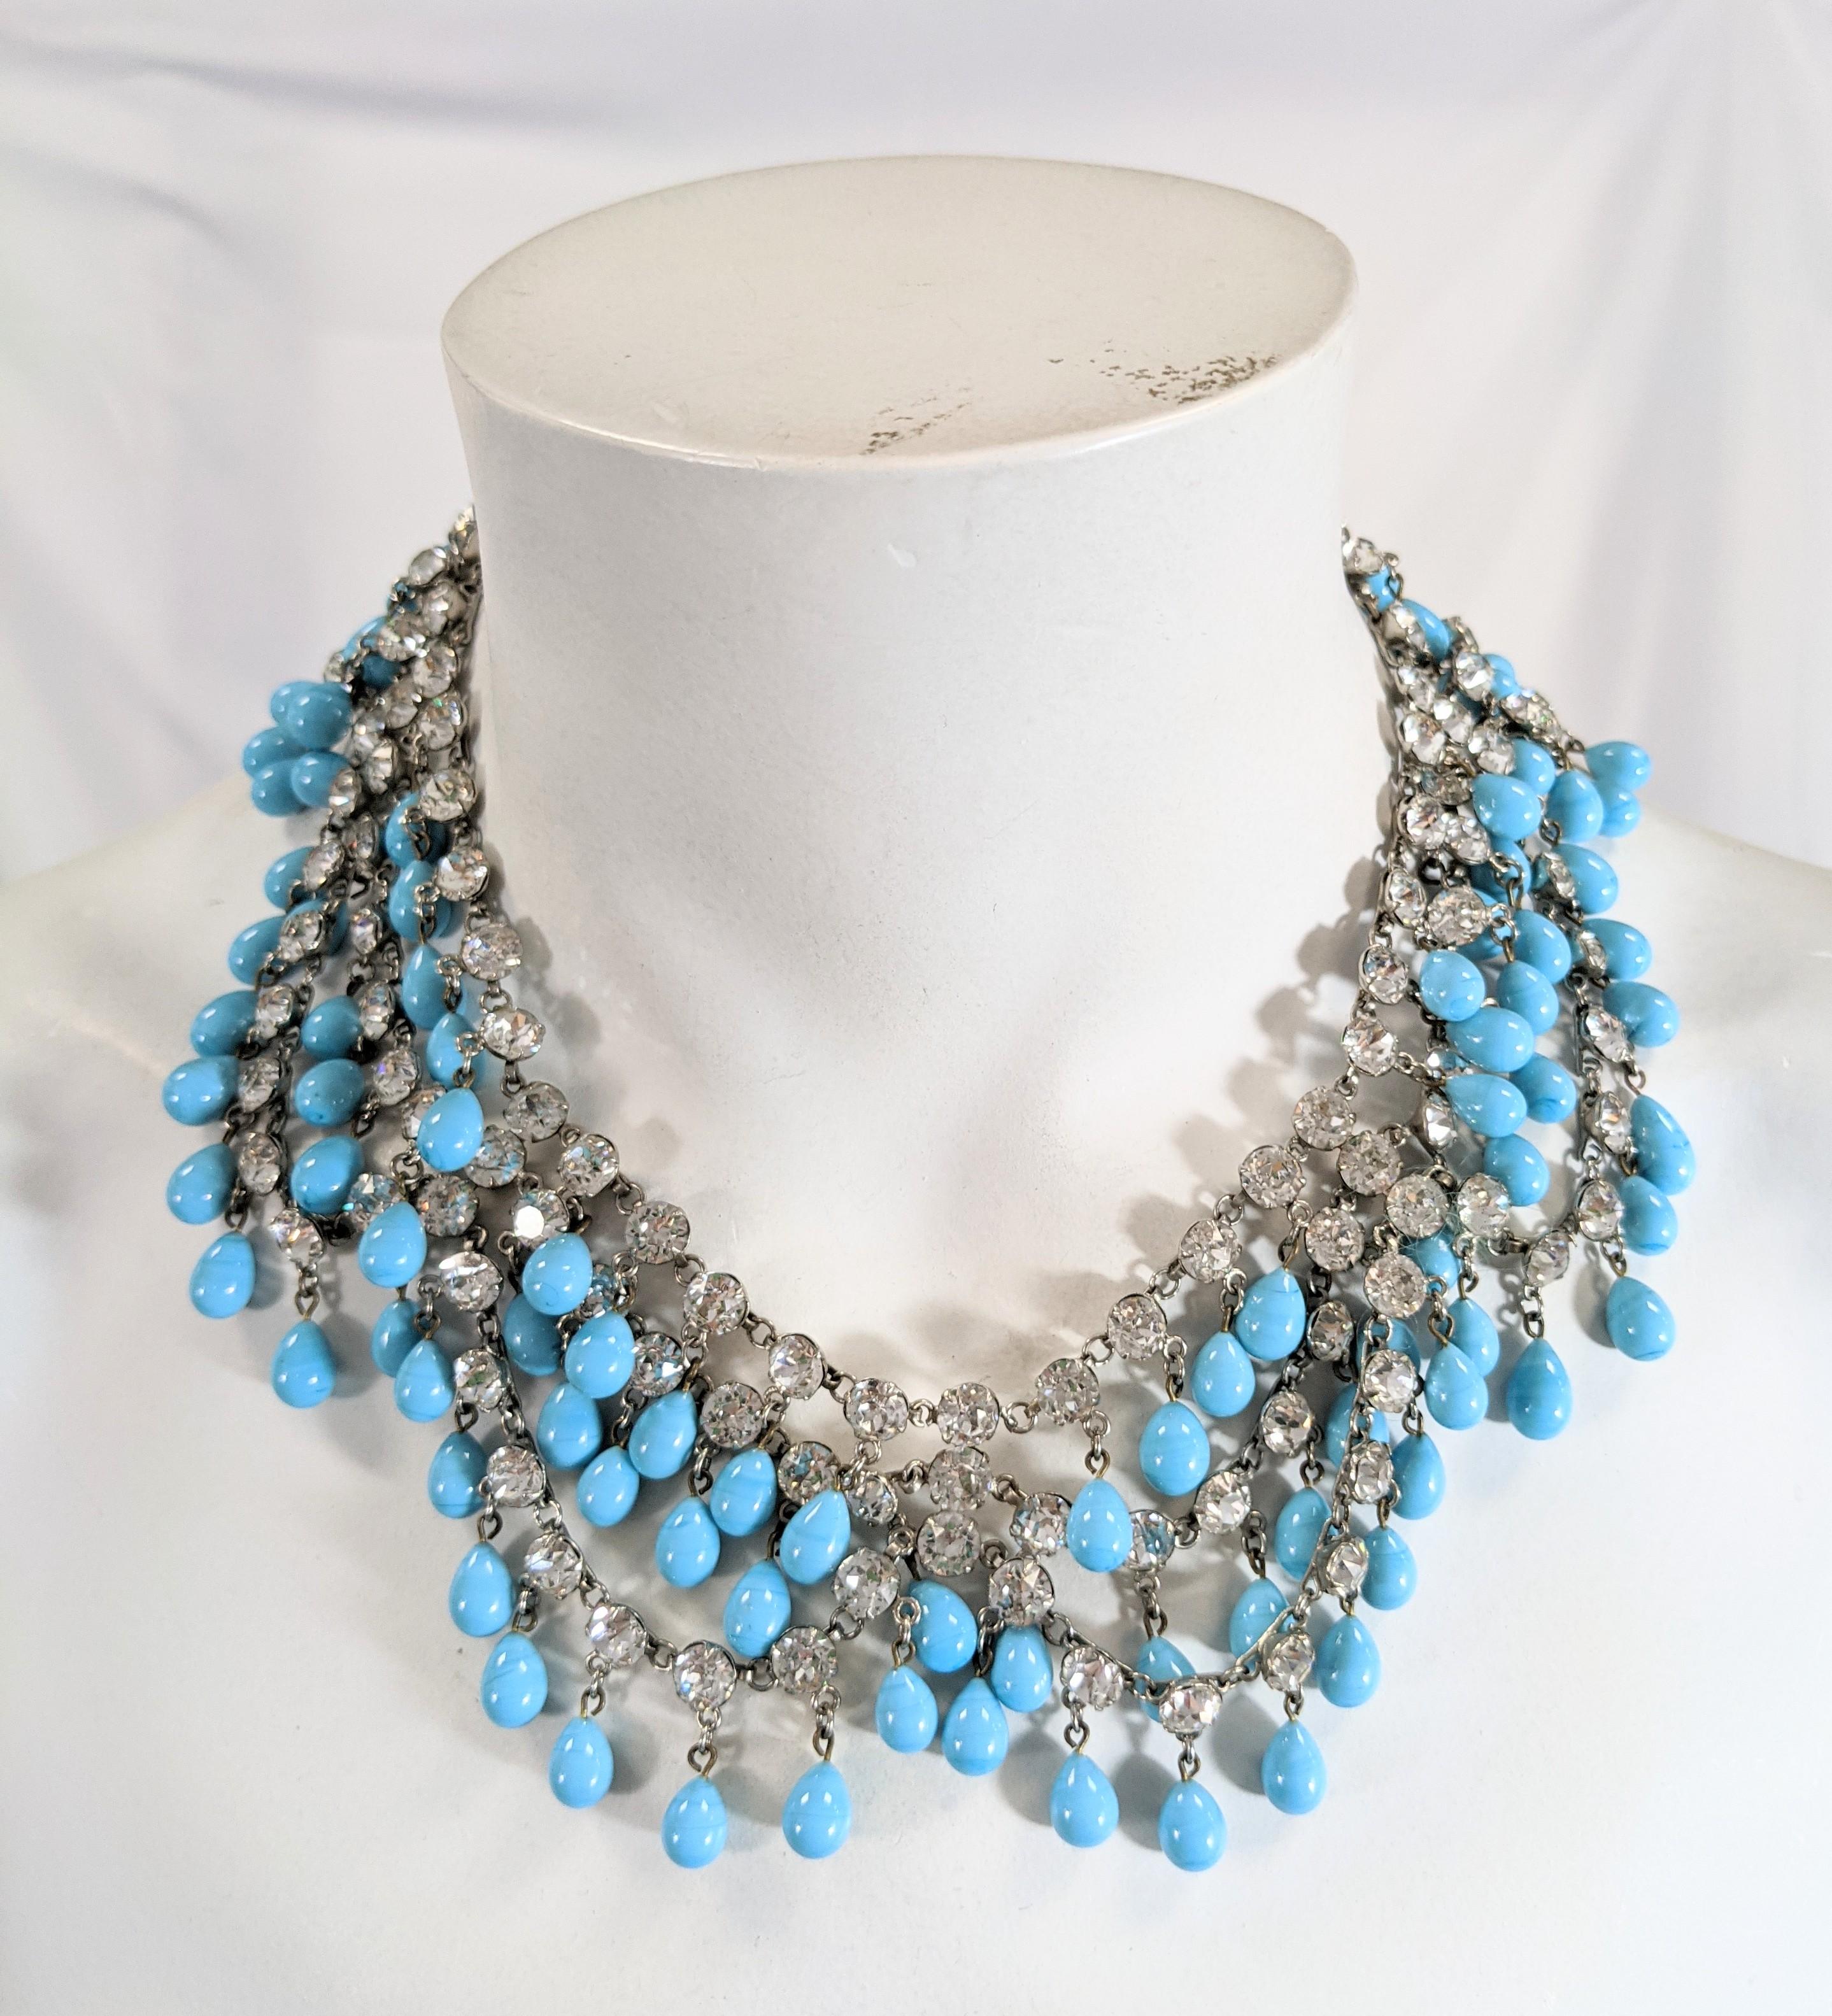 French Couture Paste and Pate de Verre Draped Collar For Sale 6